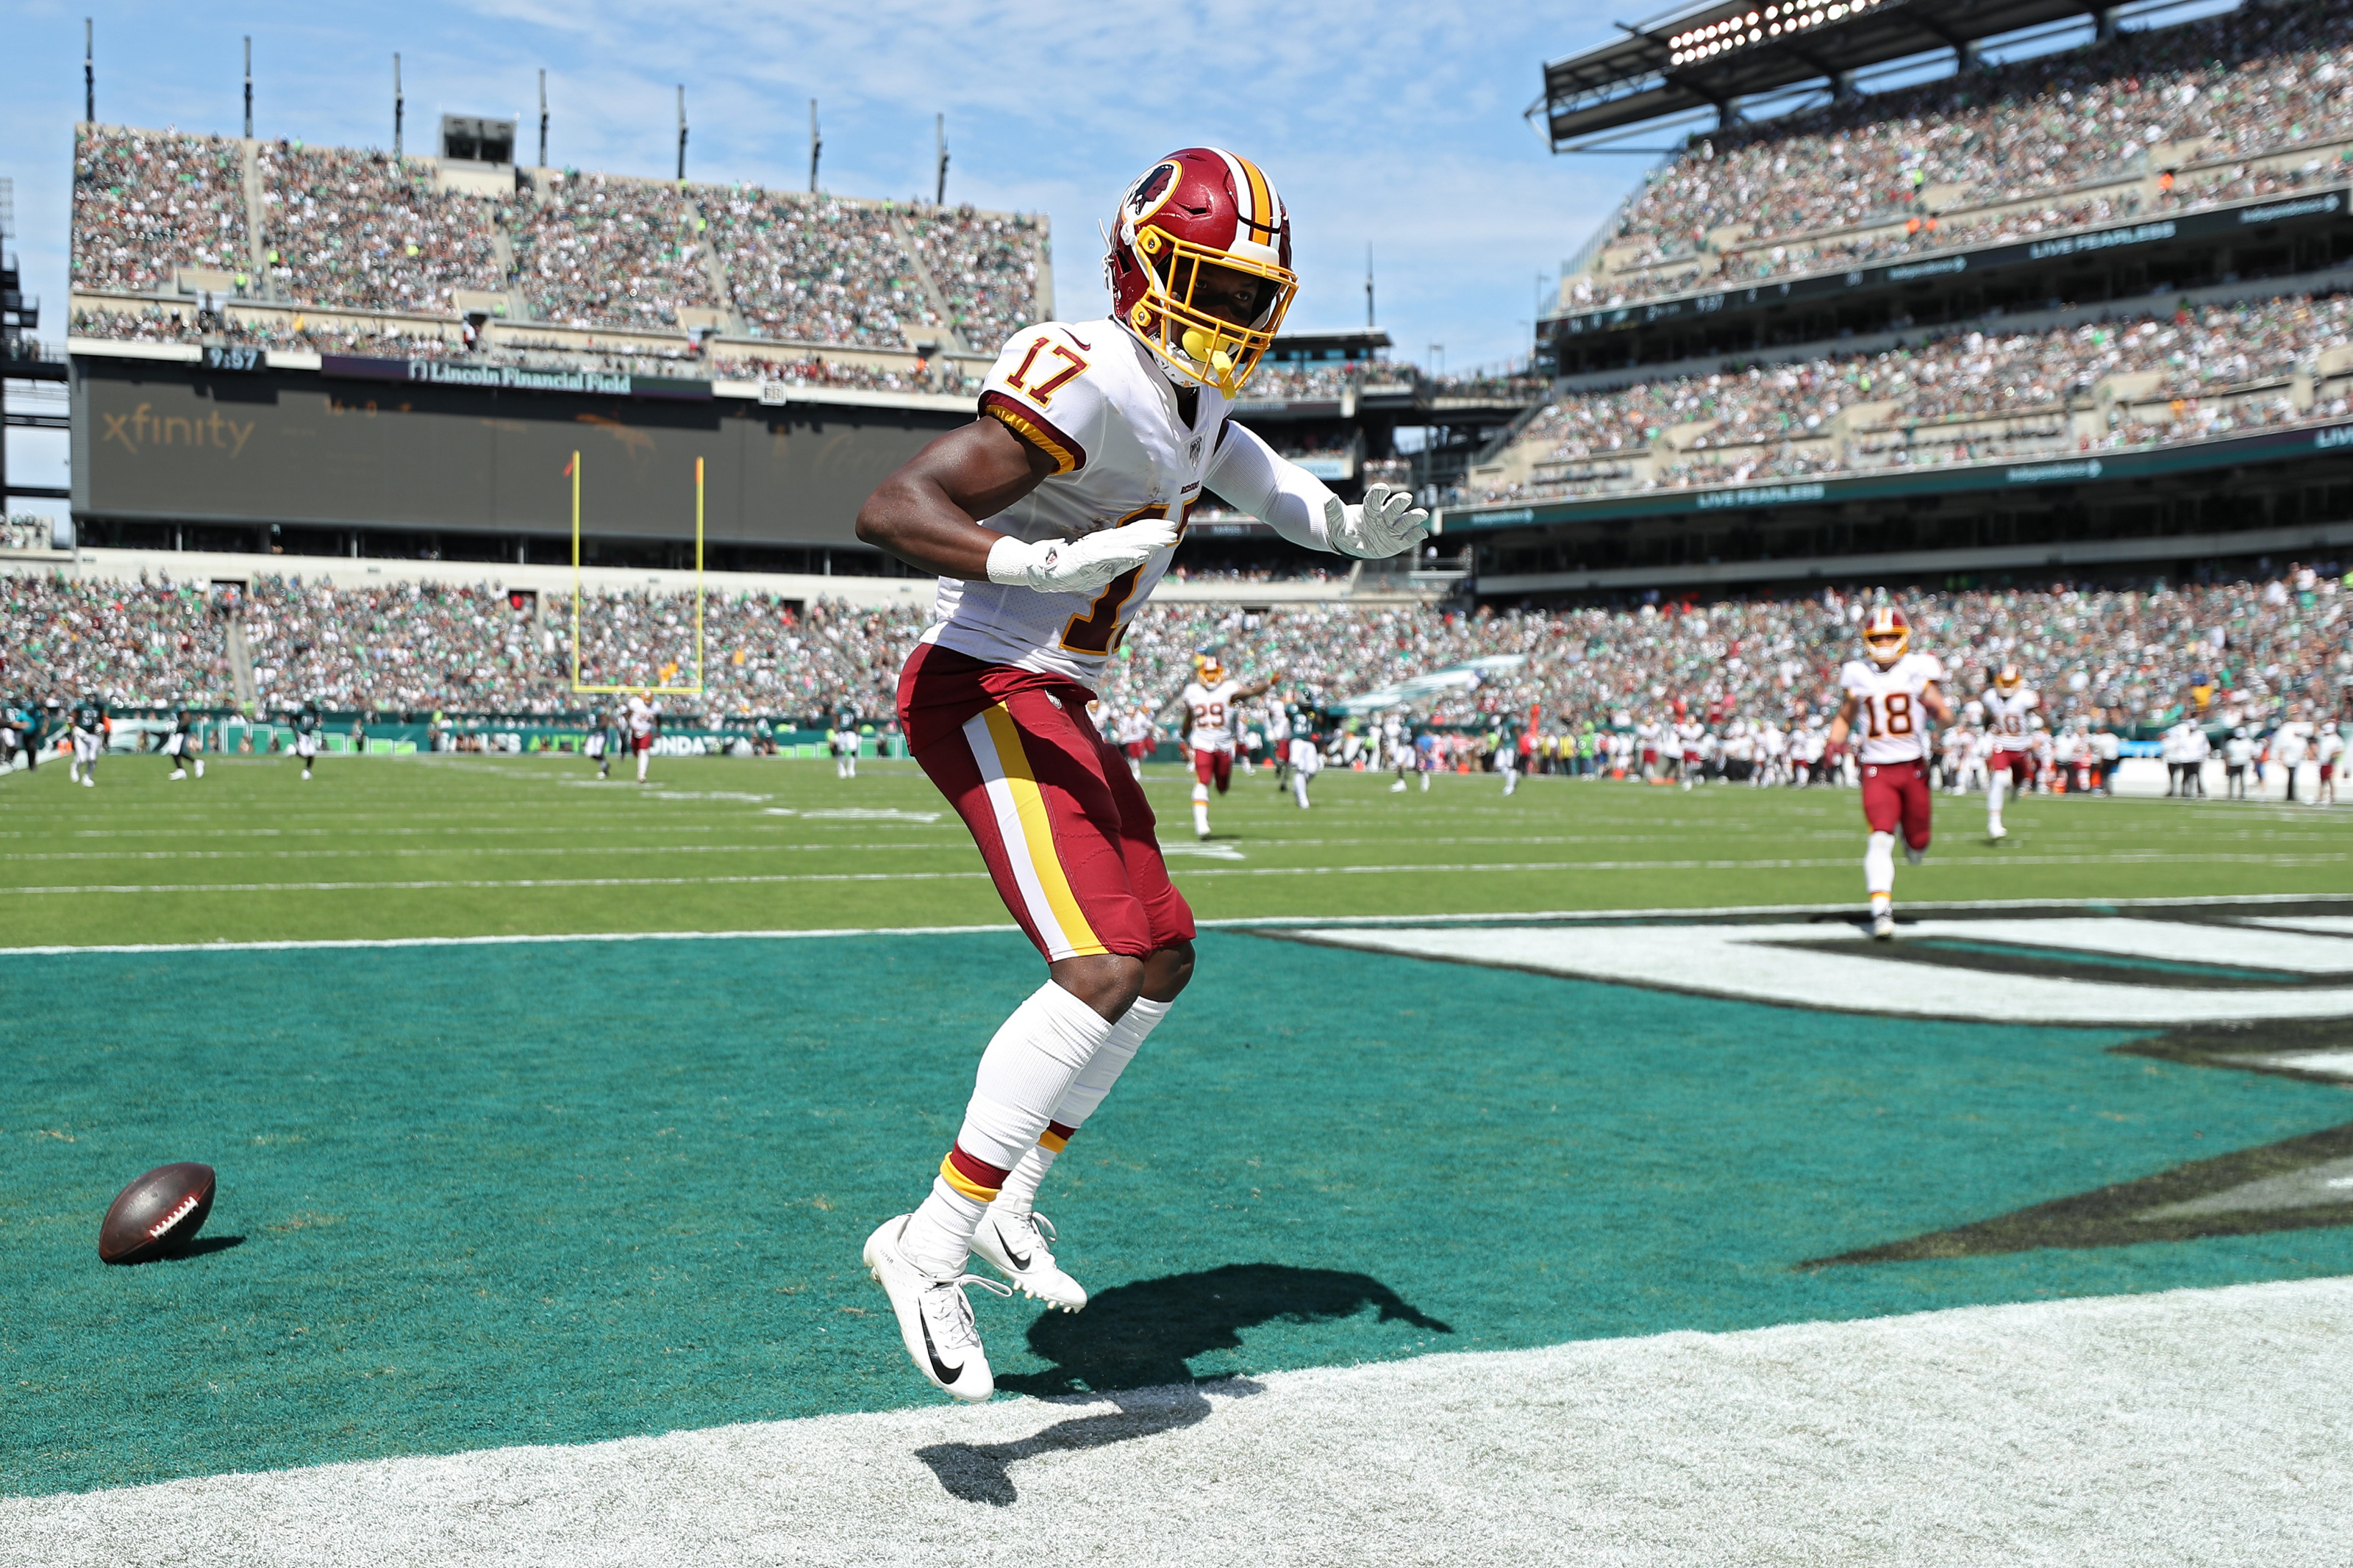 Washington Redskins: Terry McLaurin is tearing it up through two games